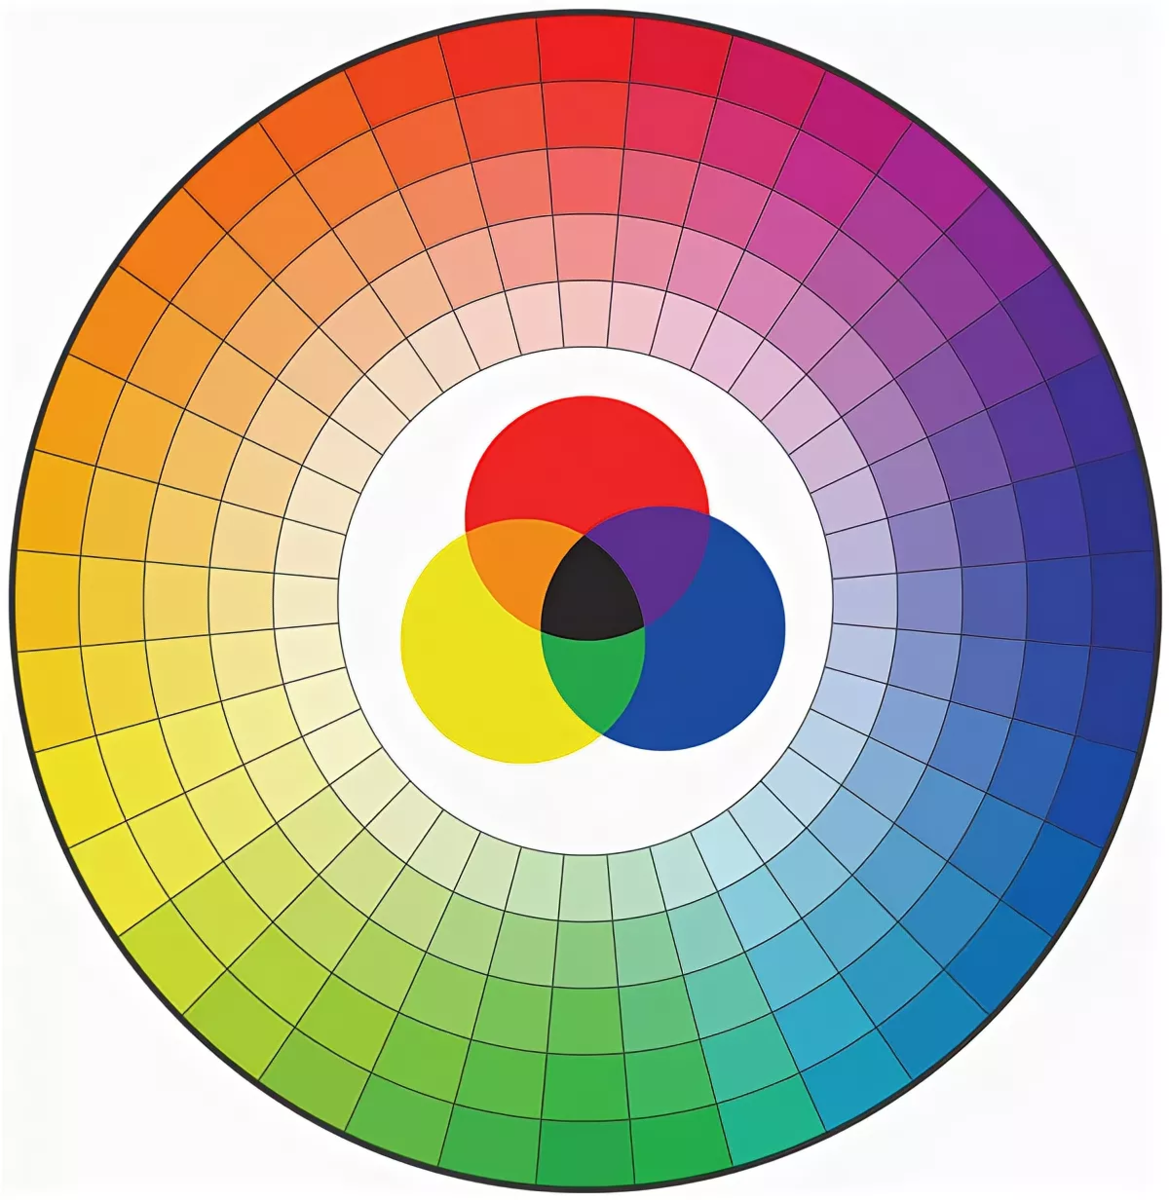 Color features